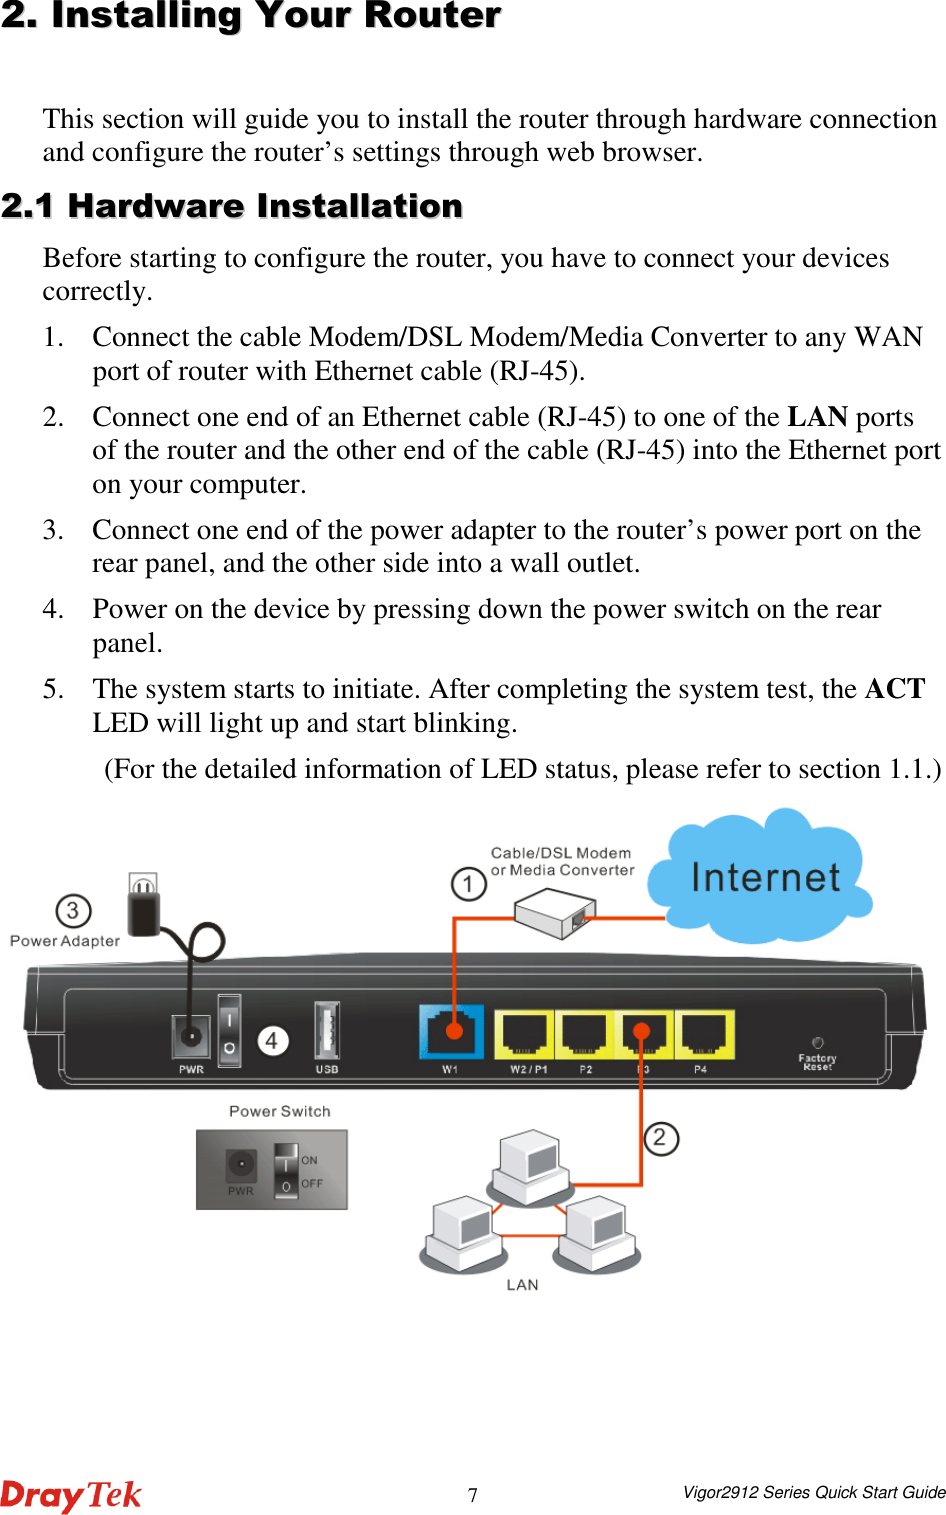  Vigor2912 Series Quick Start Guide 7 22..  IInnssttaalllliinngg  YYoouurr  RRoouutteerr  This section will guide you to install the router through hardware connection and configure the router’s settings through web browser.   22..11  HHaarrddwwaarree  IInnssttaallllaattiioonn  Before starting to configure the router, you have to connect your devices correctly. 1. Connect the cable Modem/DSL Modem/Media Converter to any WAN port of router with Ethernet cable (RJ-45).   2. Connect one end of an Ethernet cable (RJ-45) to one of the LAN ports of the router and the other end of the cable (RJ-45) into the Ethernet port on your computer.   3. Connect one end of the power adapter to the router’s power port on the rear panel, and the other side into a wall outlet.   4. Power on the device by pressing down the power switch on the rear panel. 5. The system starts to initiate. After completing the system test, the ACT LED will light up and start blinking.   (For the detailed information of LED status, please refer to section 1.1.)  